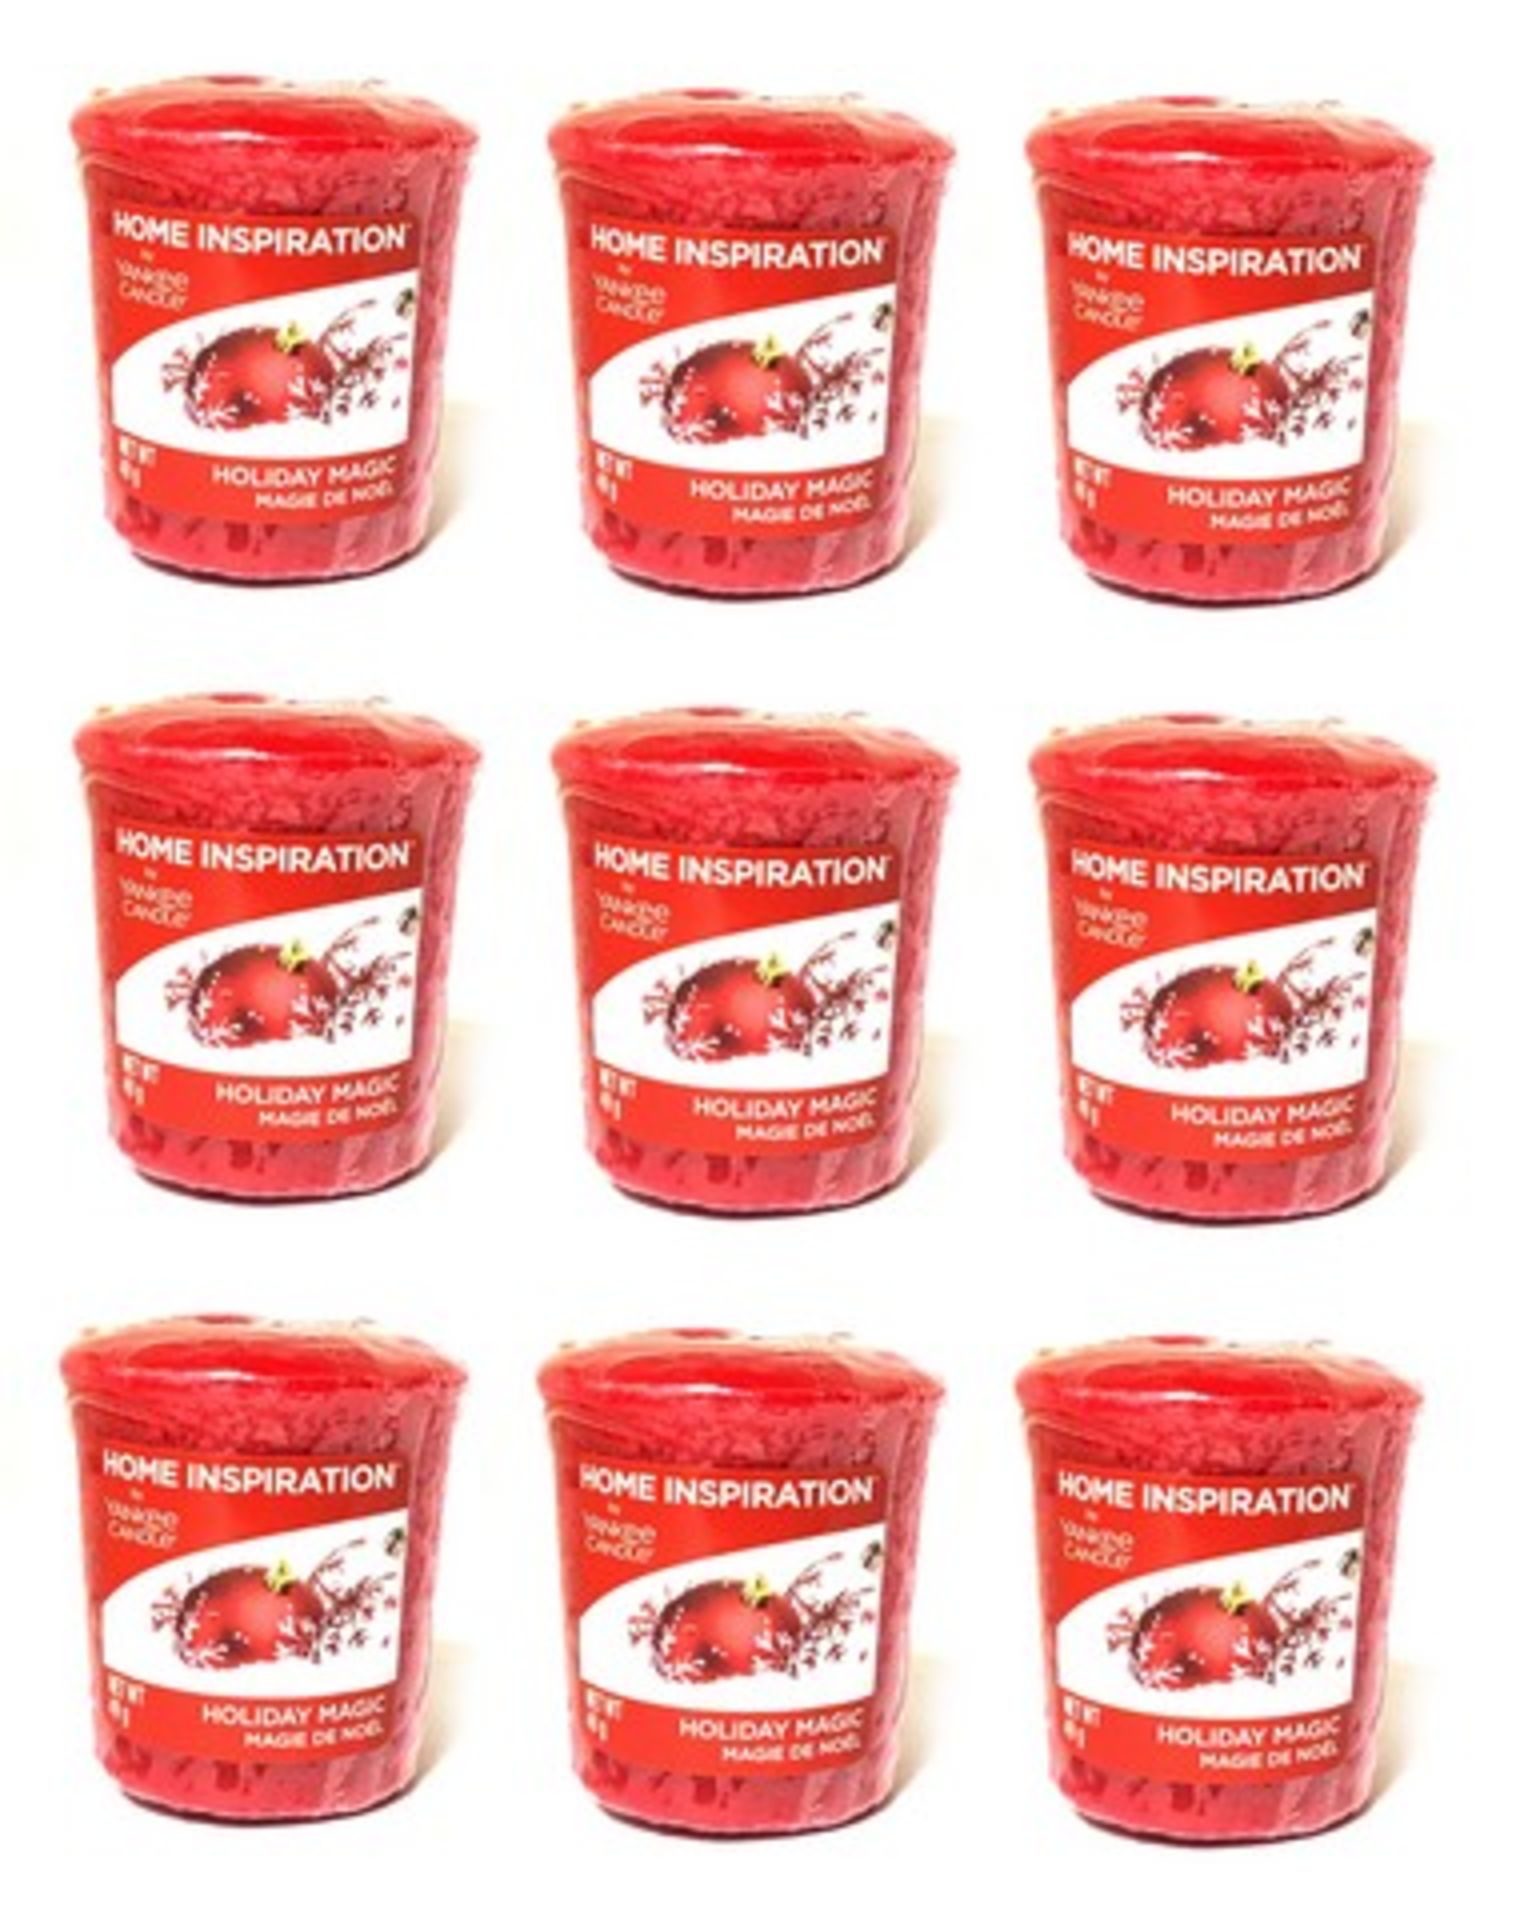 V Brand New 9 x Yankee Candle Votive Holiday Magic - Internet Price £21.15 (Thestore91)